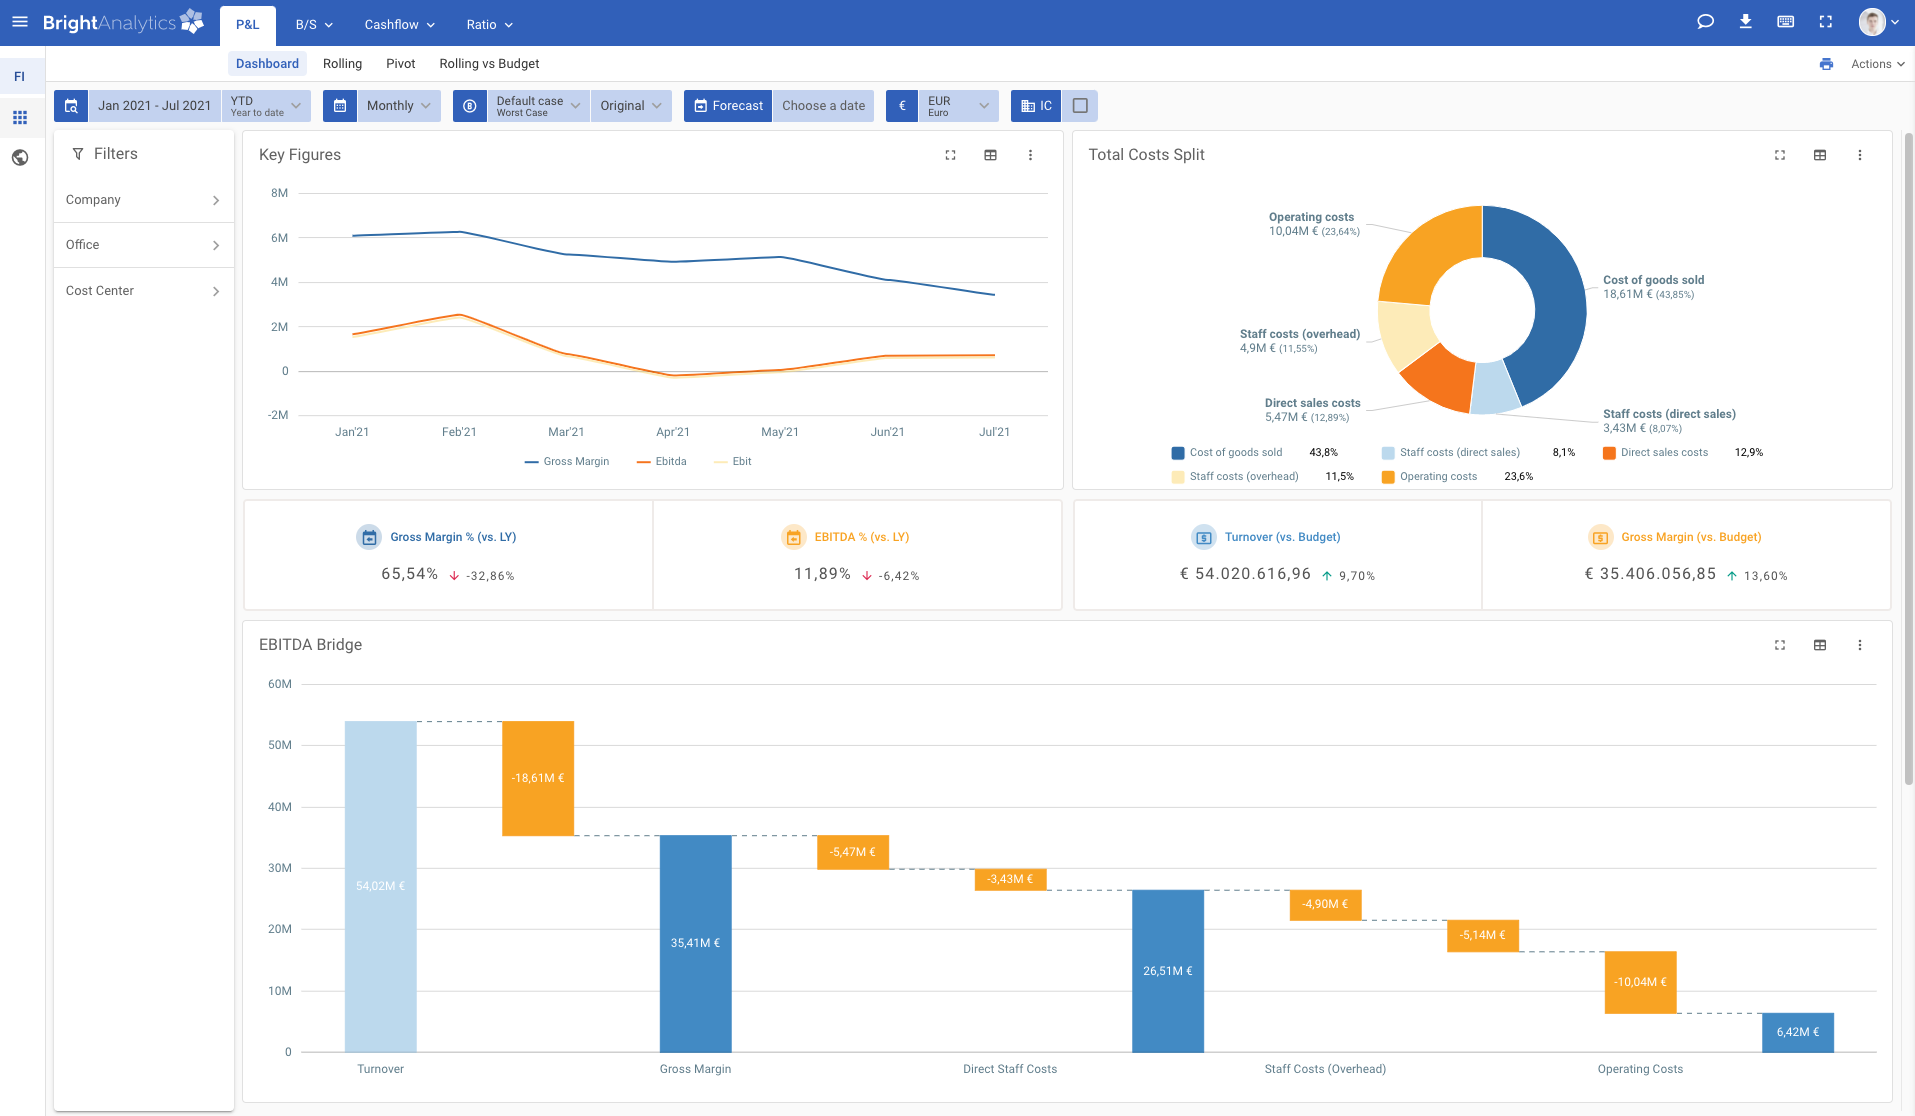 Mercur alternative - Intuitive and user-friendly interface of BrightAnalytics